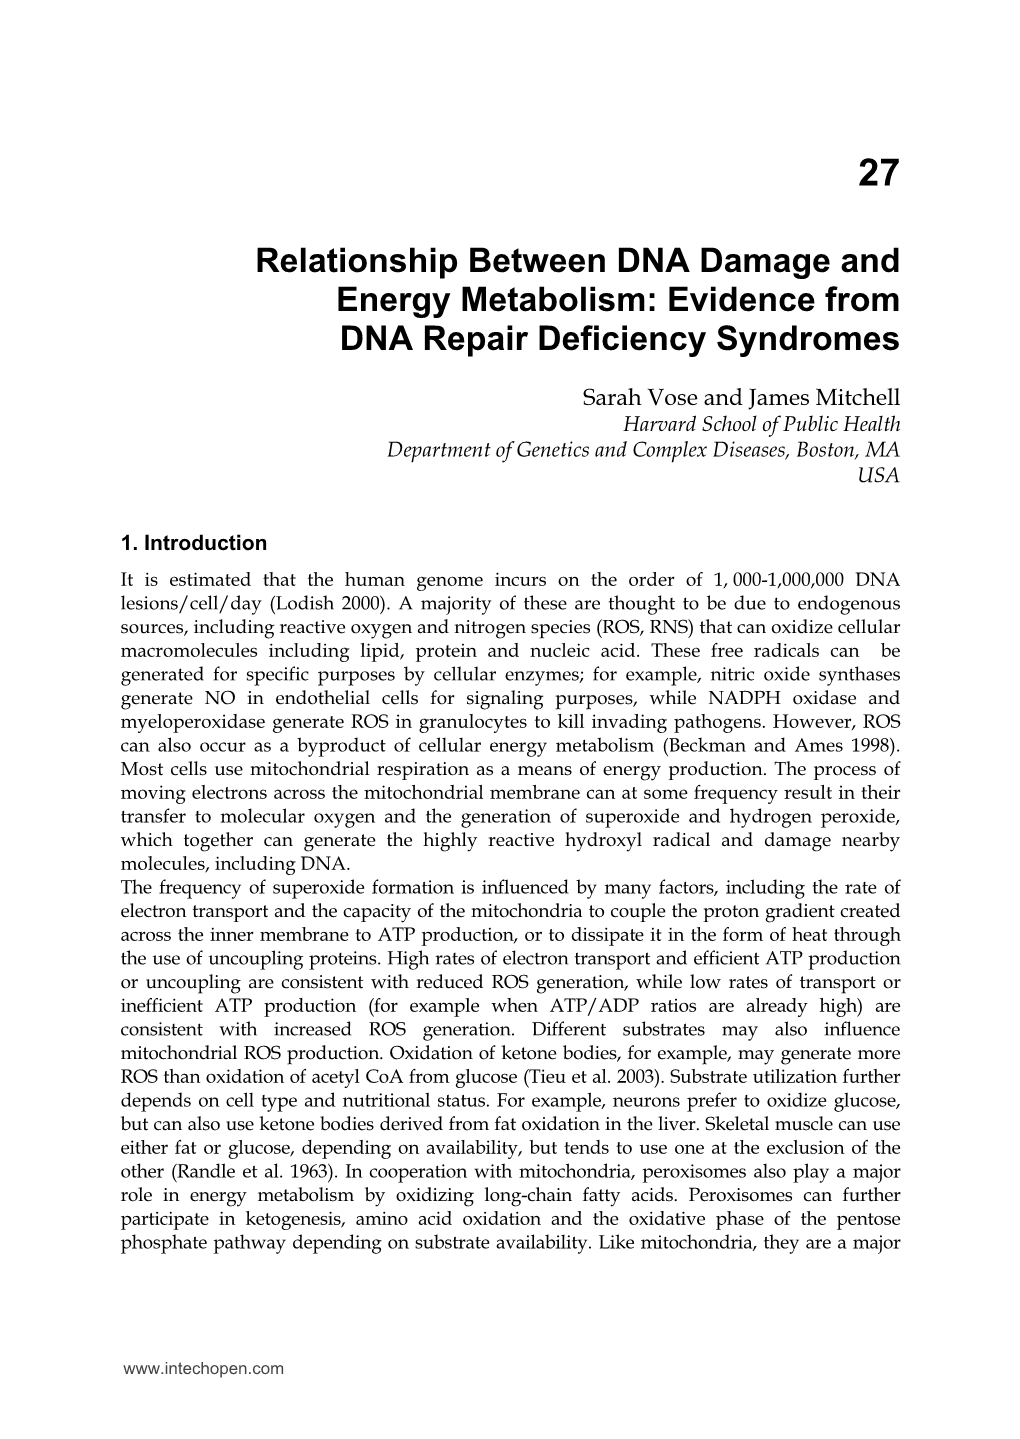 Relationship Between DNA Damage and Energy Metabolism: Evidence from DNA Repair Deficiency Syndromes